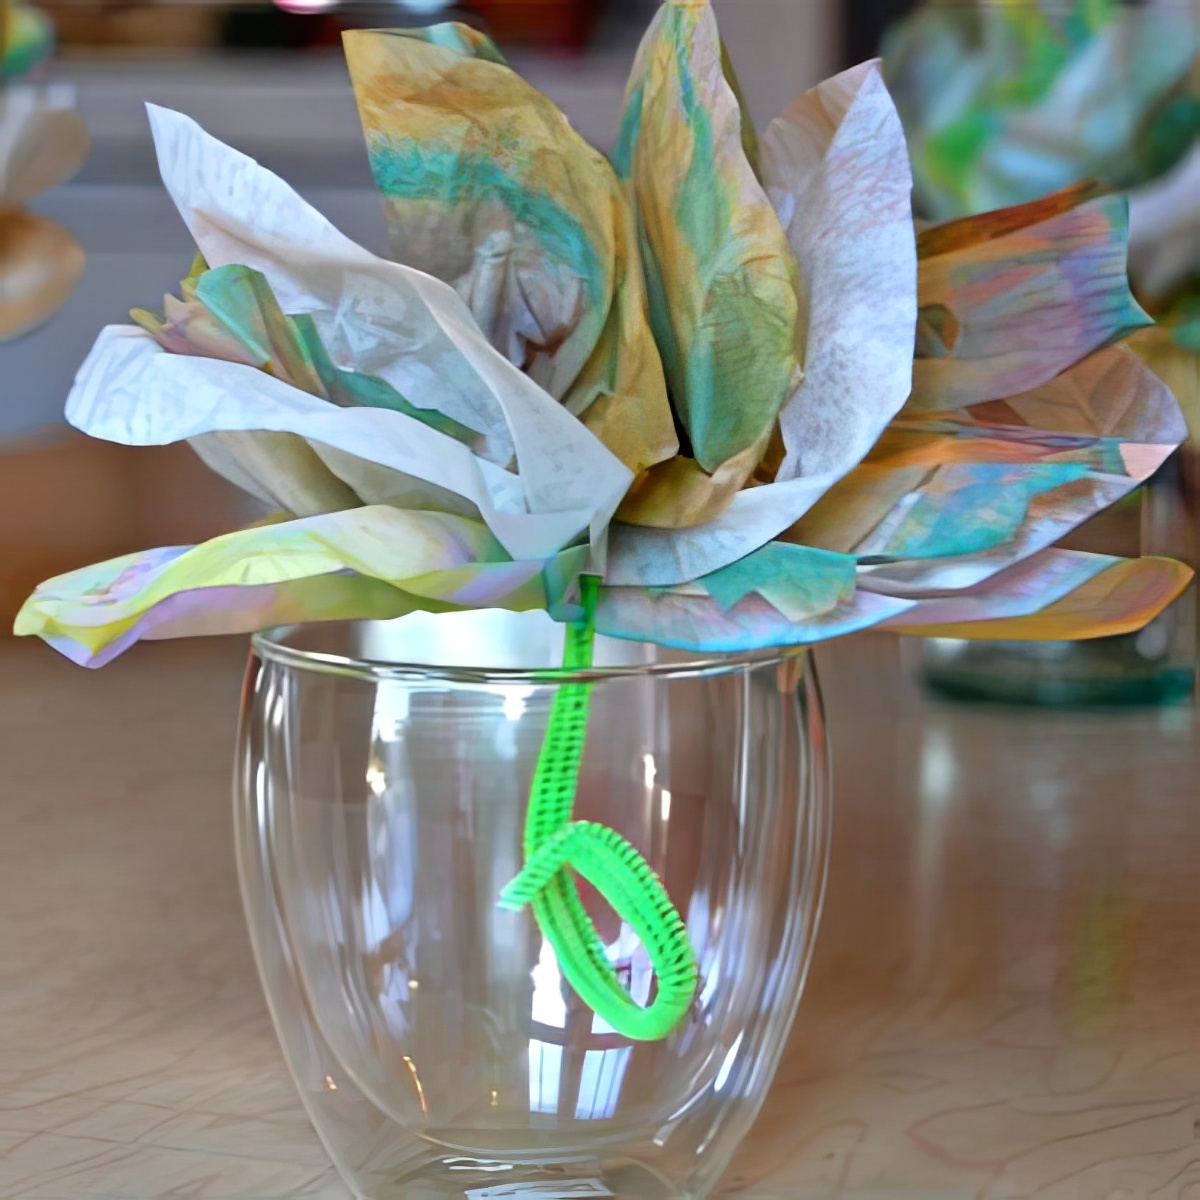 Coffee Filter Flowers using cute mugs, colorful papers, and pipe cleaners